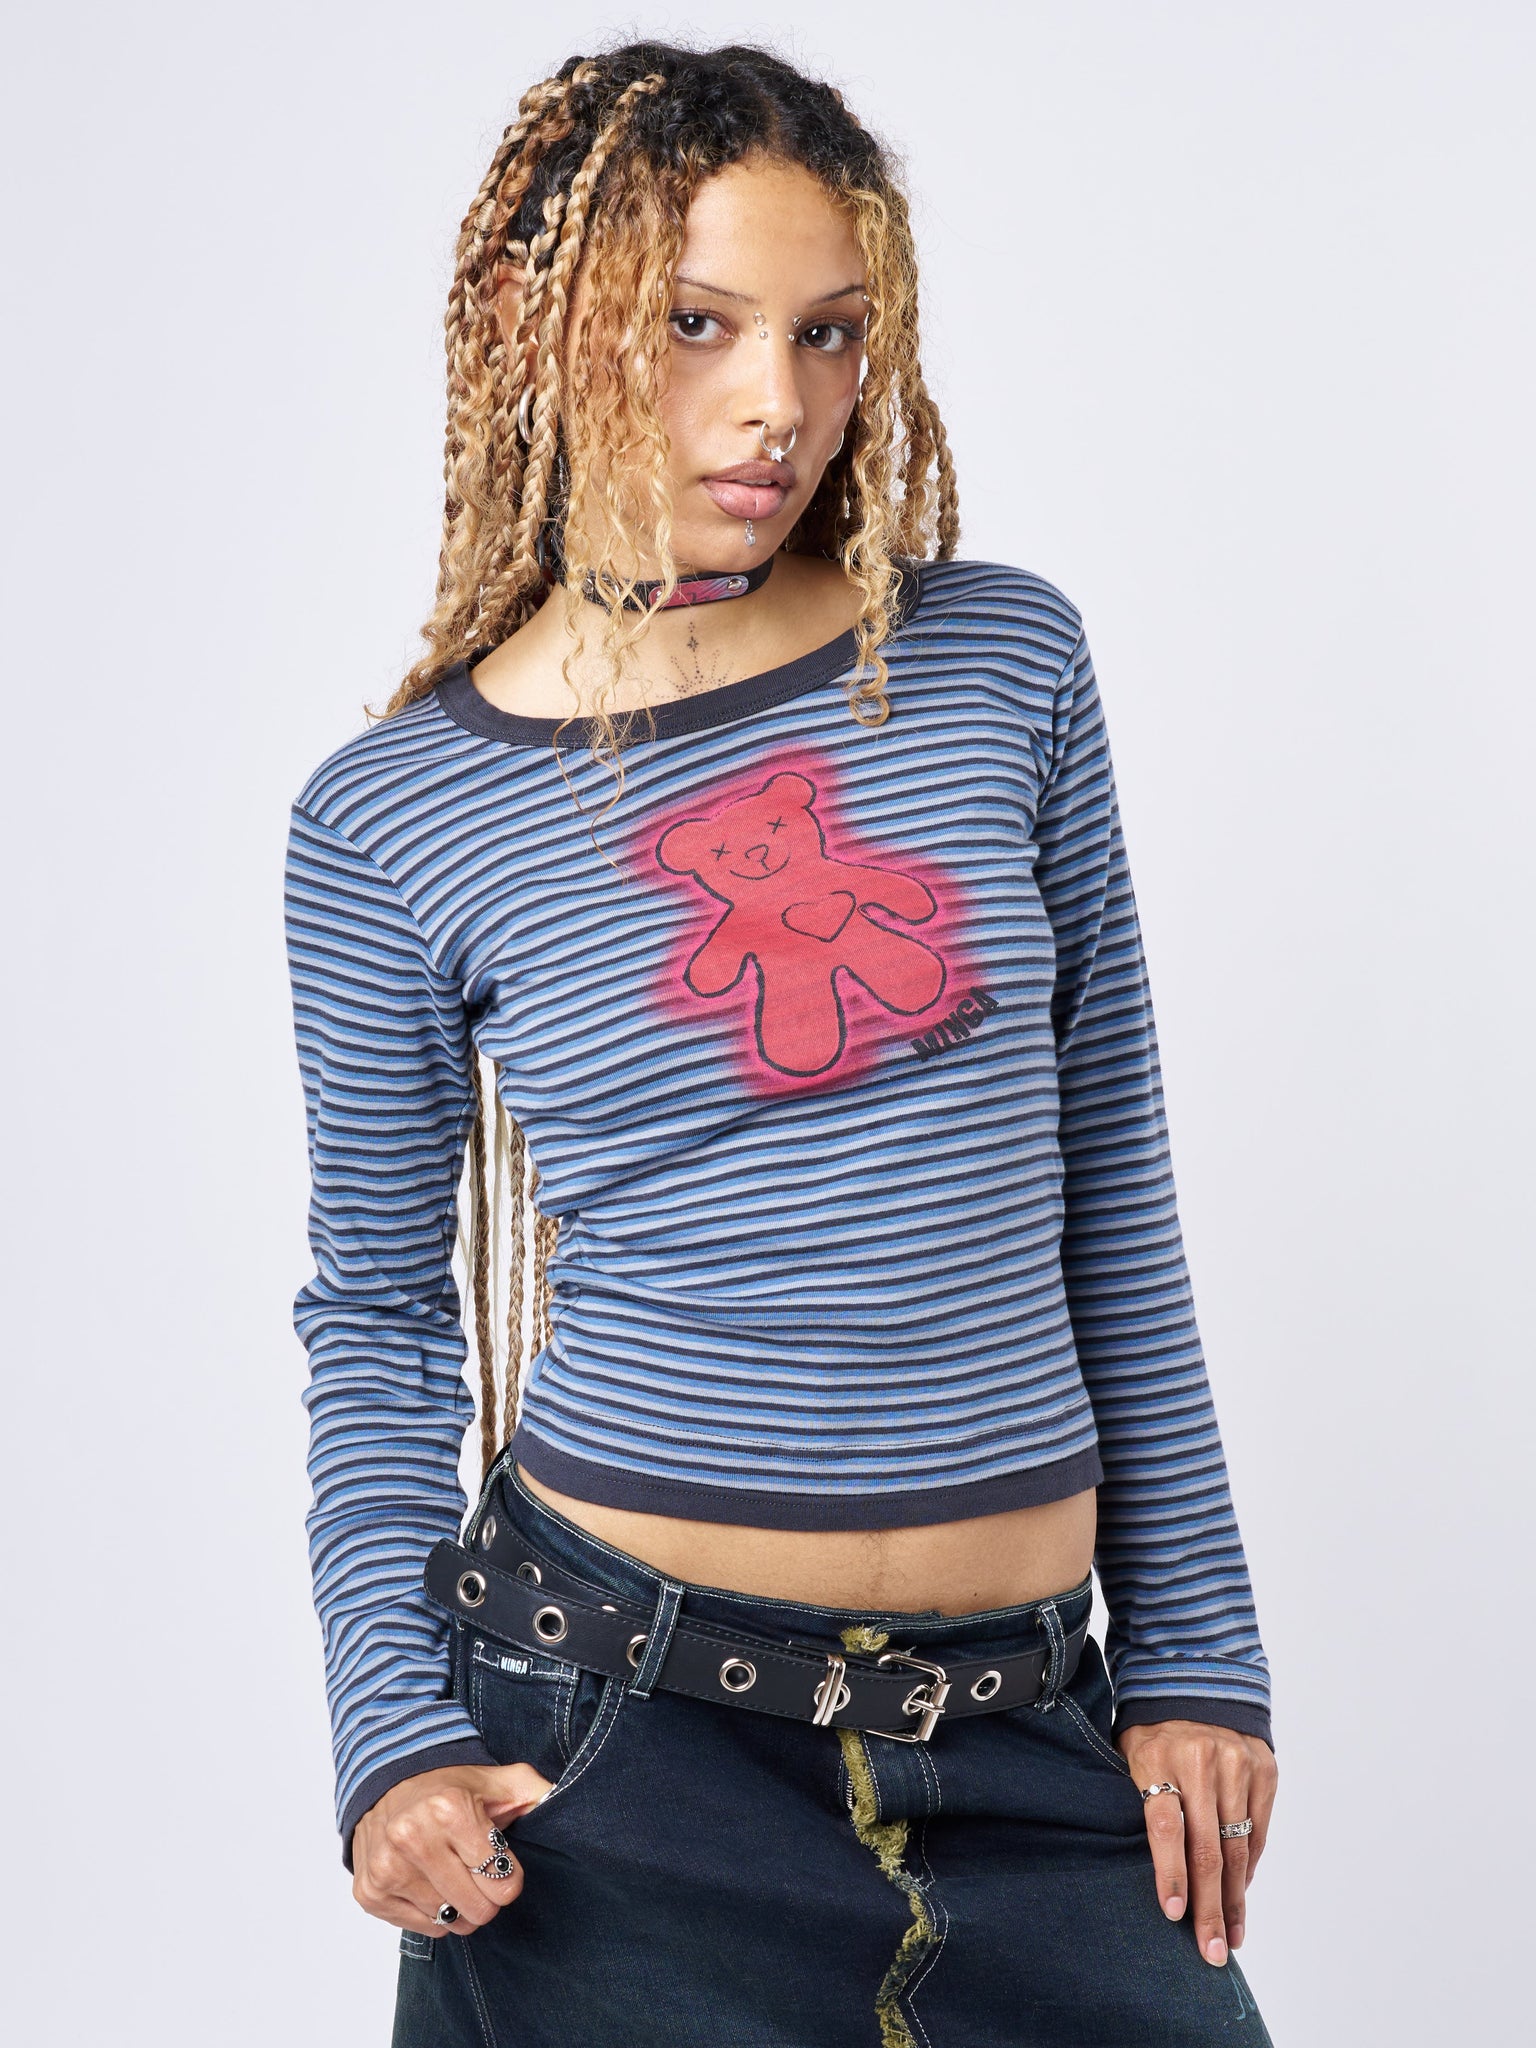 Bloody Teddy Blue Striped Top product